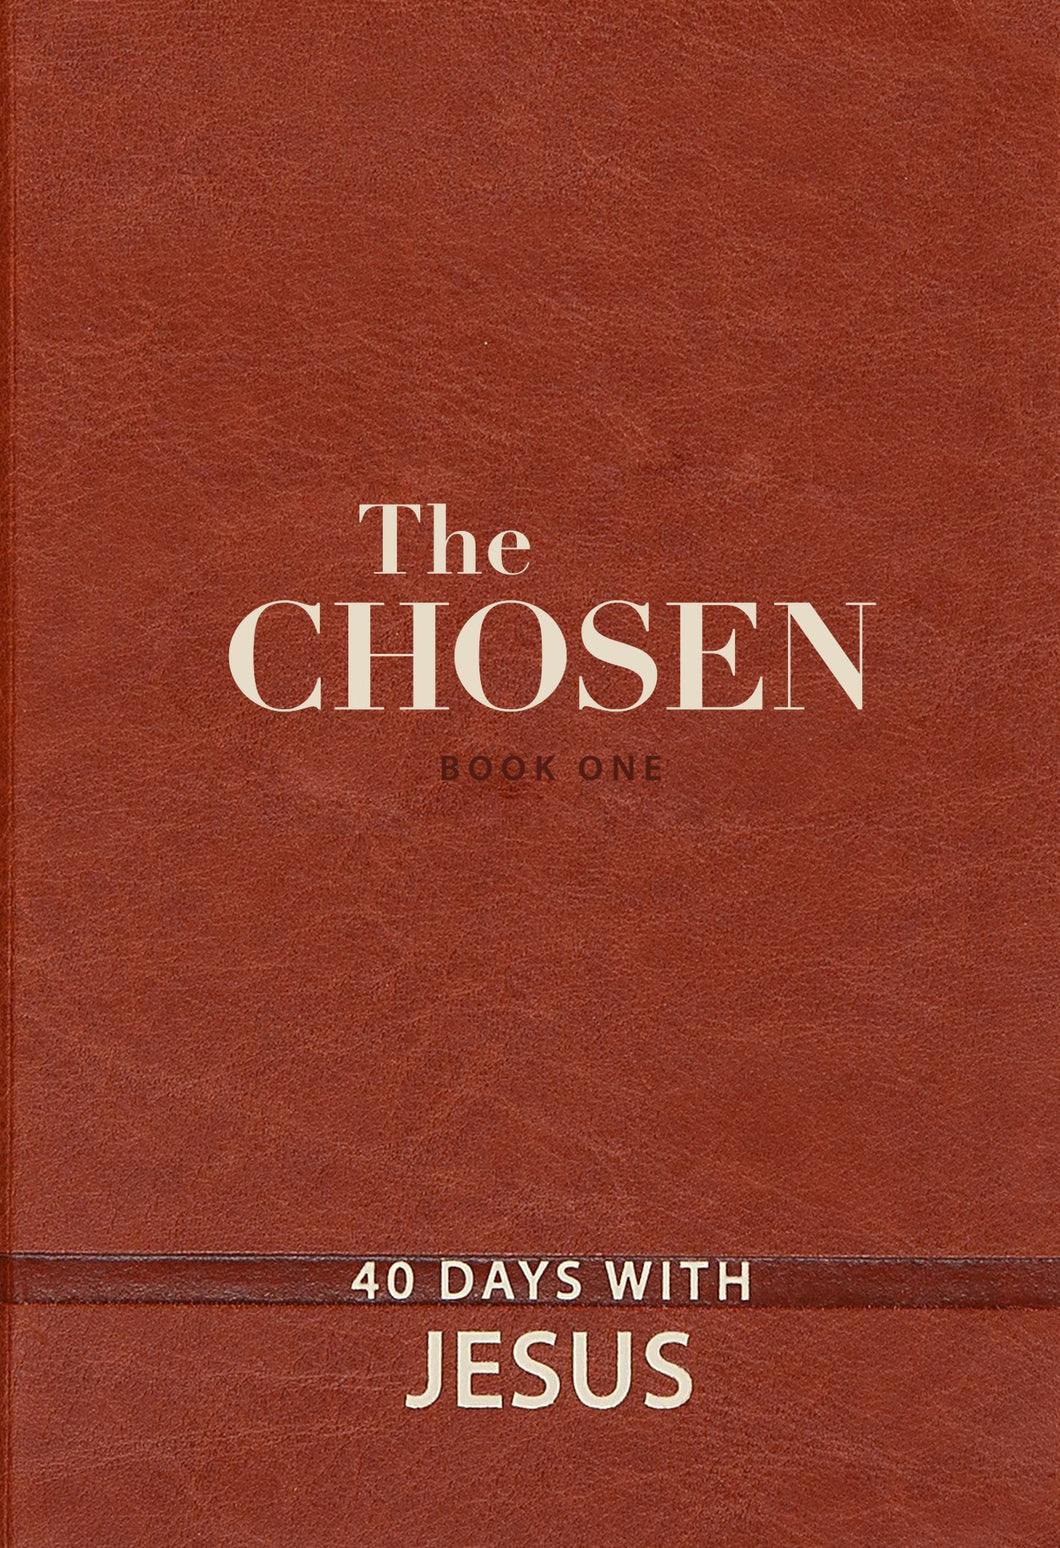 Book One: 40 Days With Jesus